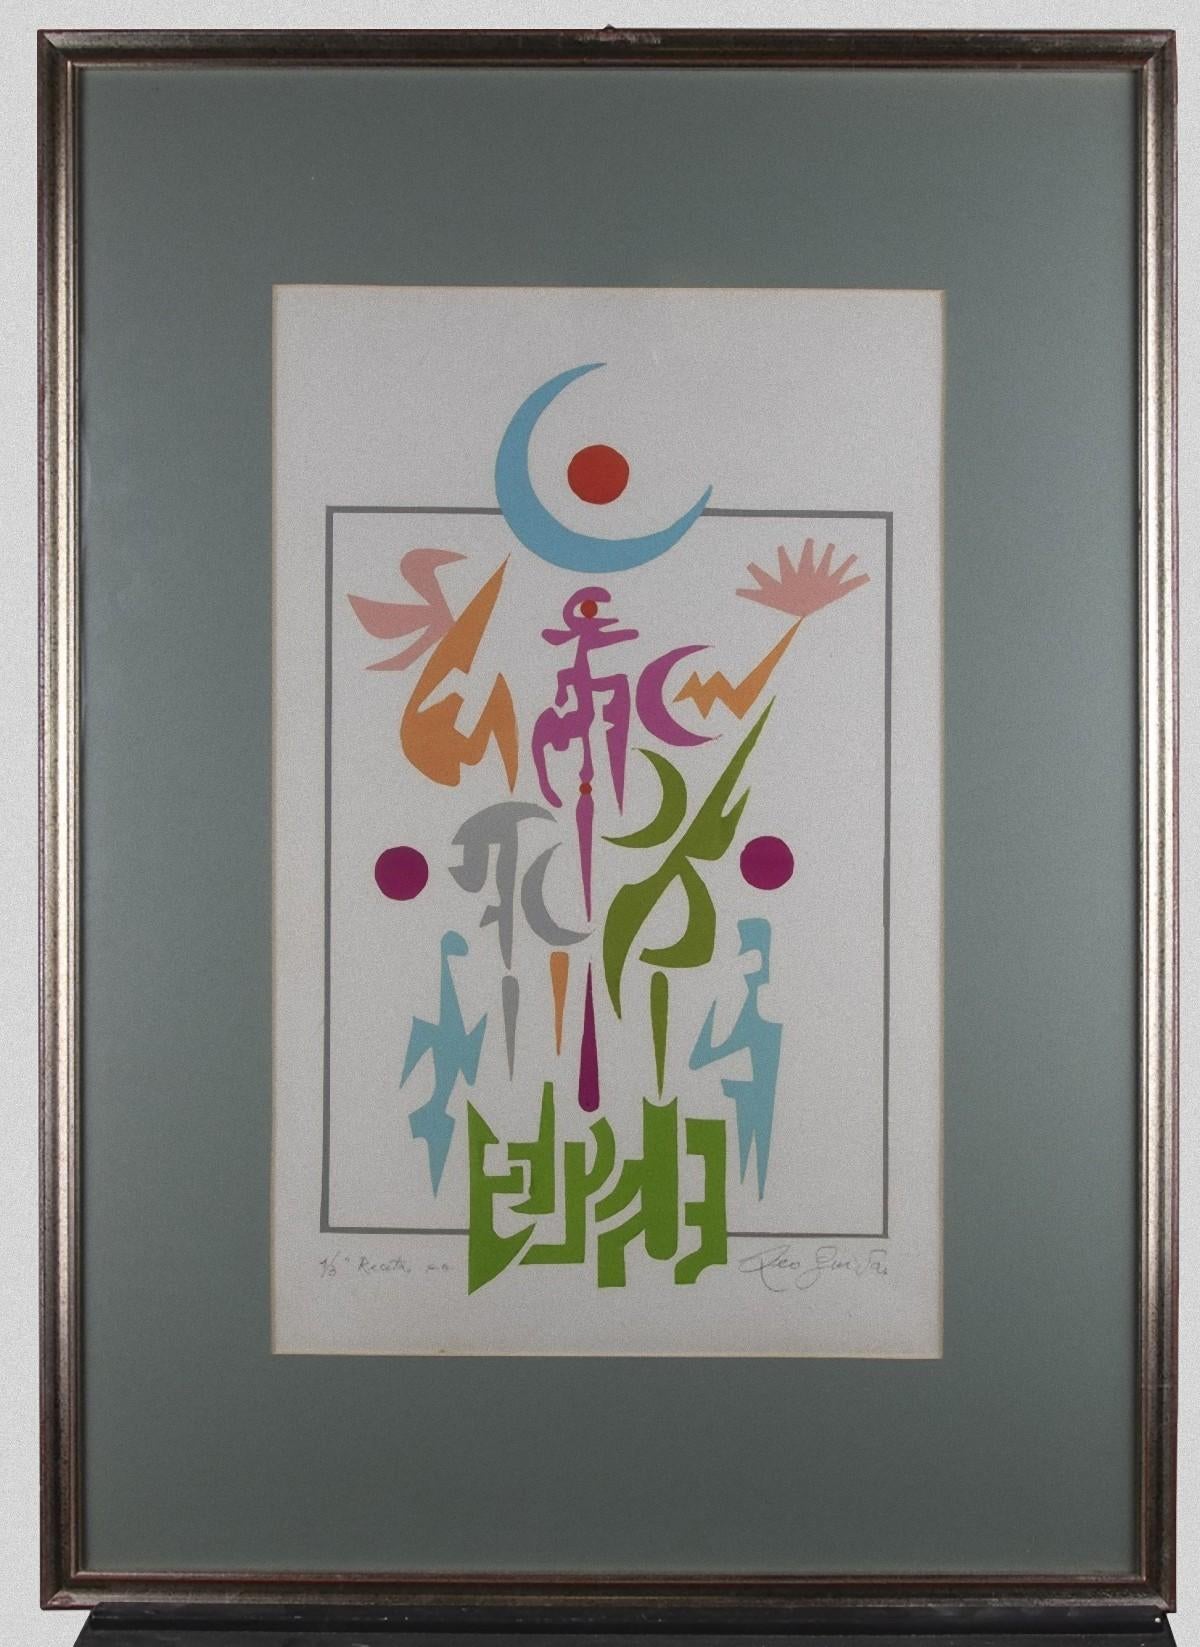 The King's Nightingale (Original Title: L’usignolo del Re) is an original Contemporary artwork realized in 1995 by the italian artist Leo Guida (1992 - 2017).

Original Screen Print.

Hand-signed, Numbered and titled in pencil on the lower right